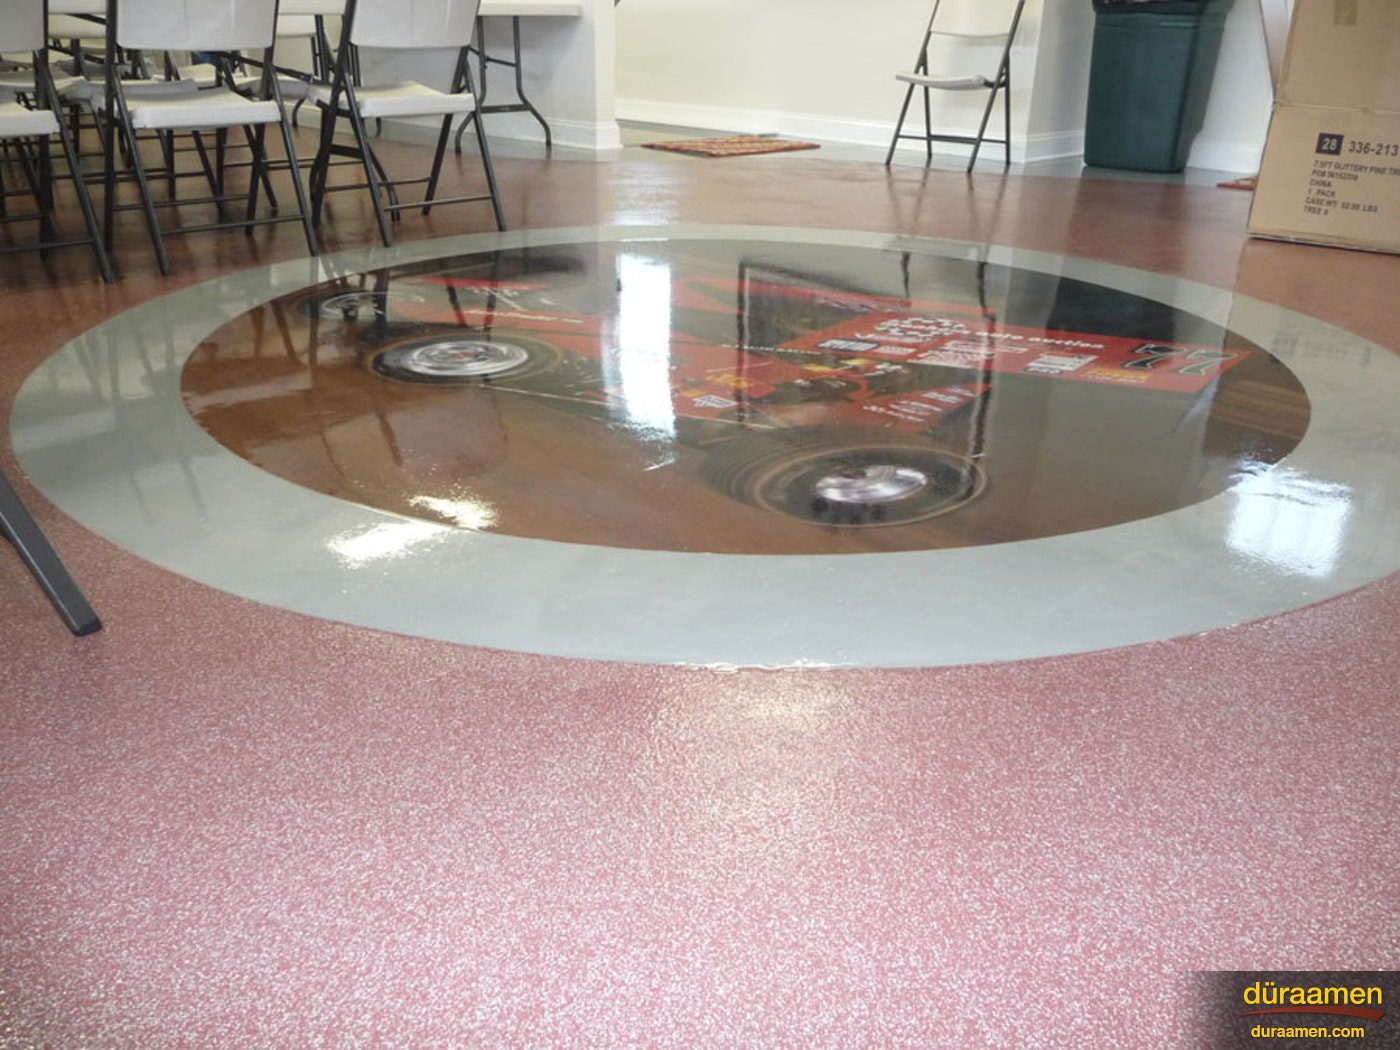 Garage floor epoxy coatings are ideal for meeting rooms as they offer protection and from and easy clean up of spills and liquids Vinyl Chips flooring in a meeting hall in Harrisburg PA | Duraamen Engineered Products Inc